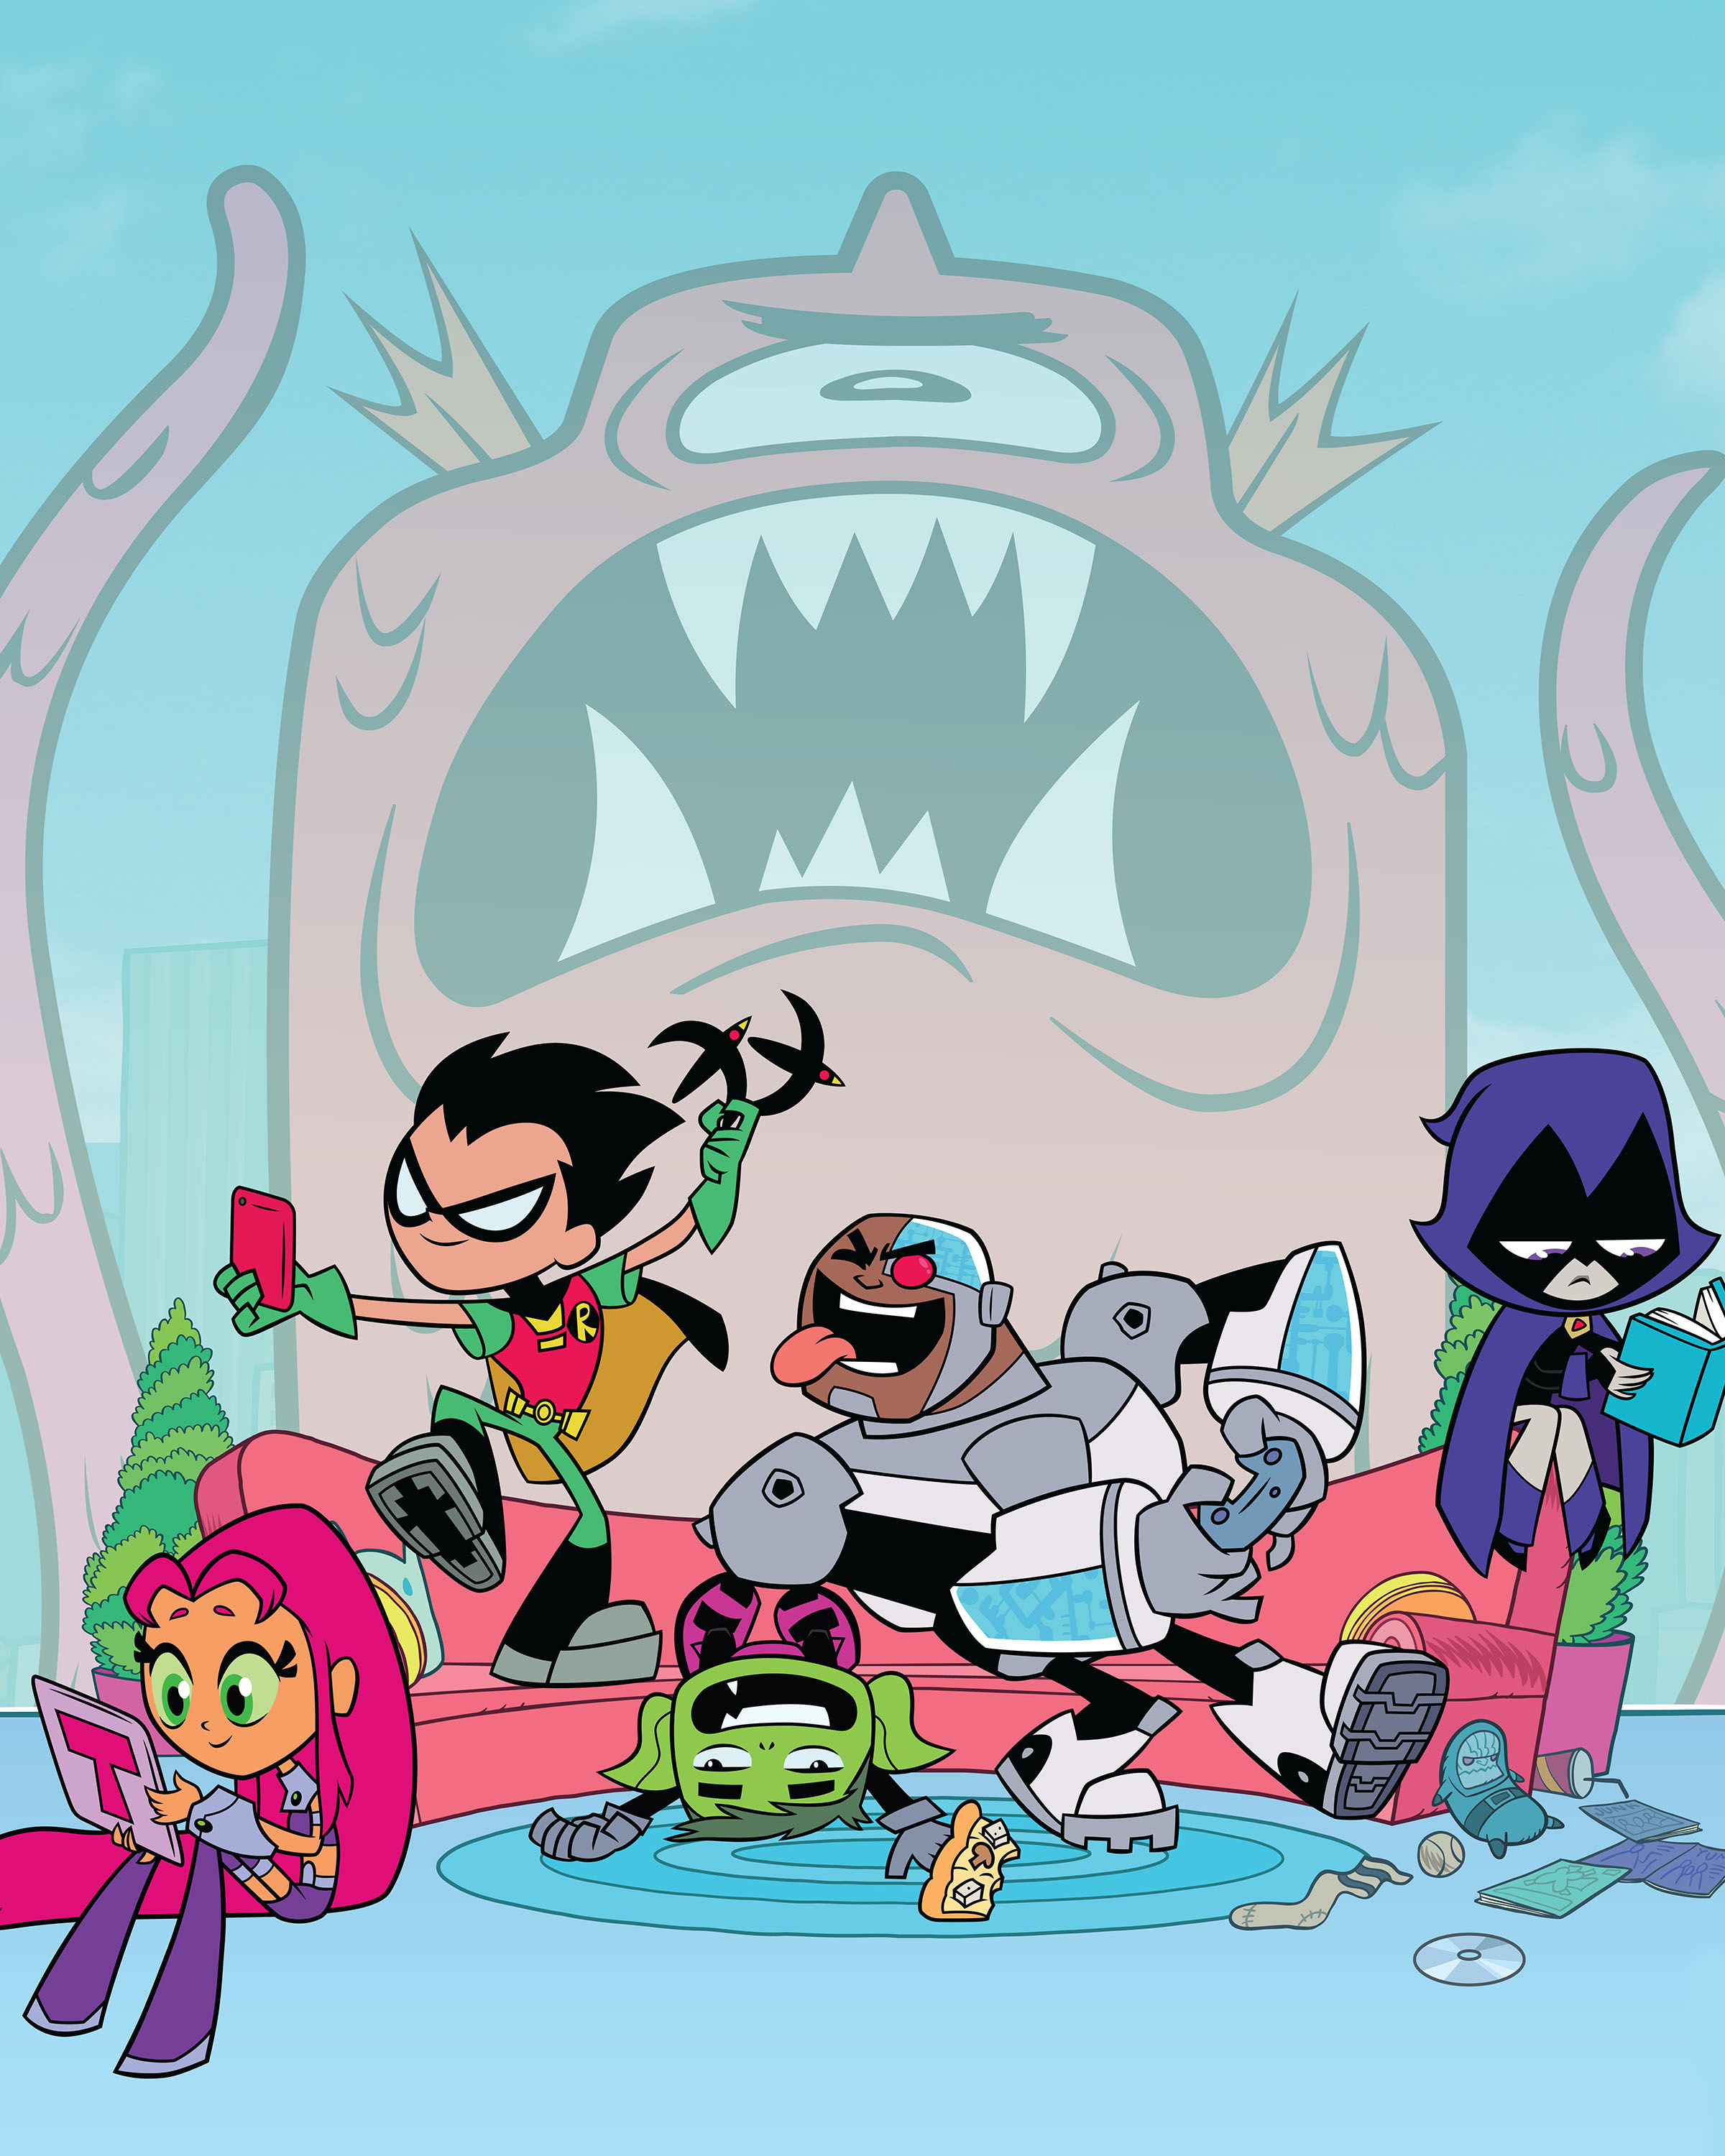 (L-R): Starfire, Robin, Beast Boy, Cyborg and Raven are the Teen Titans in the comedic animated adventure Teen Titans Go!, airing Wednesday nights 6:30/5:30c on Cartoon Network.